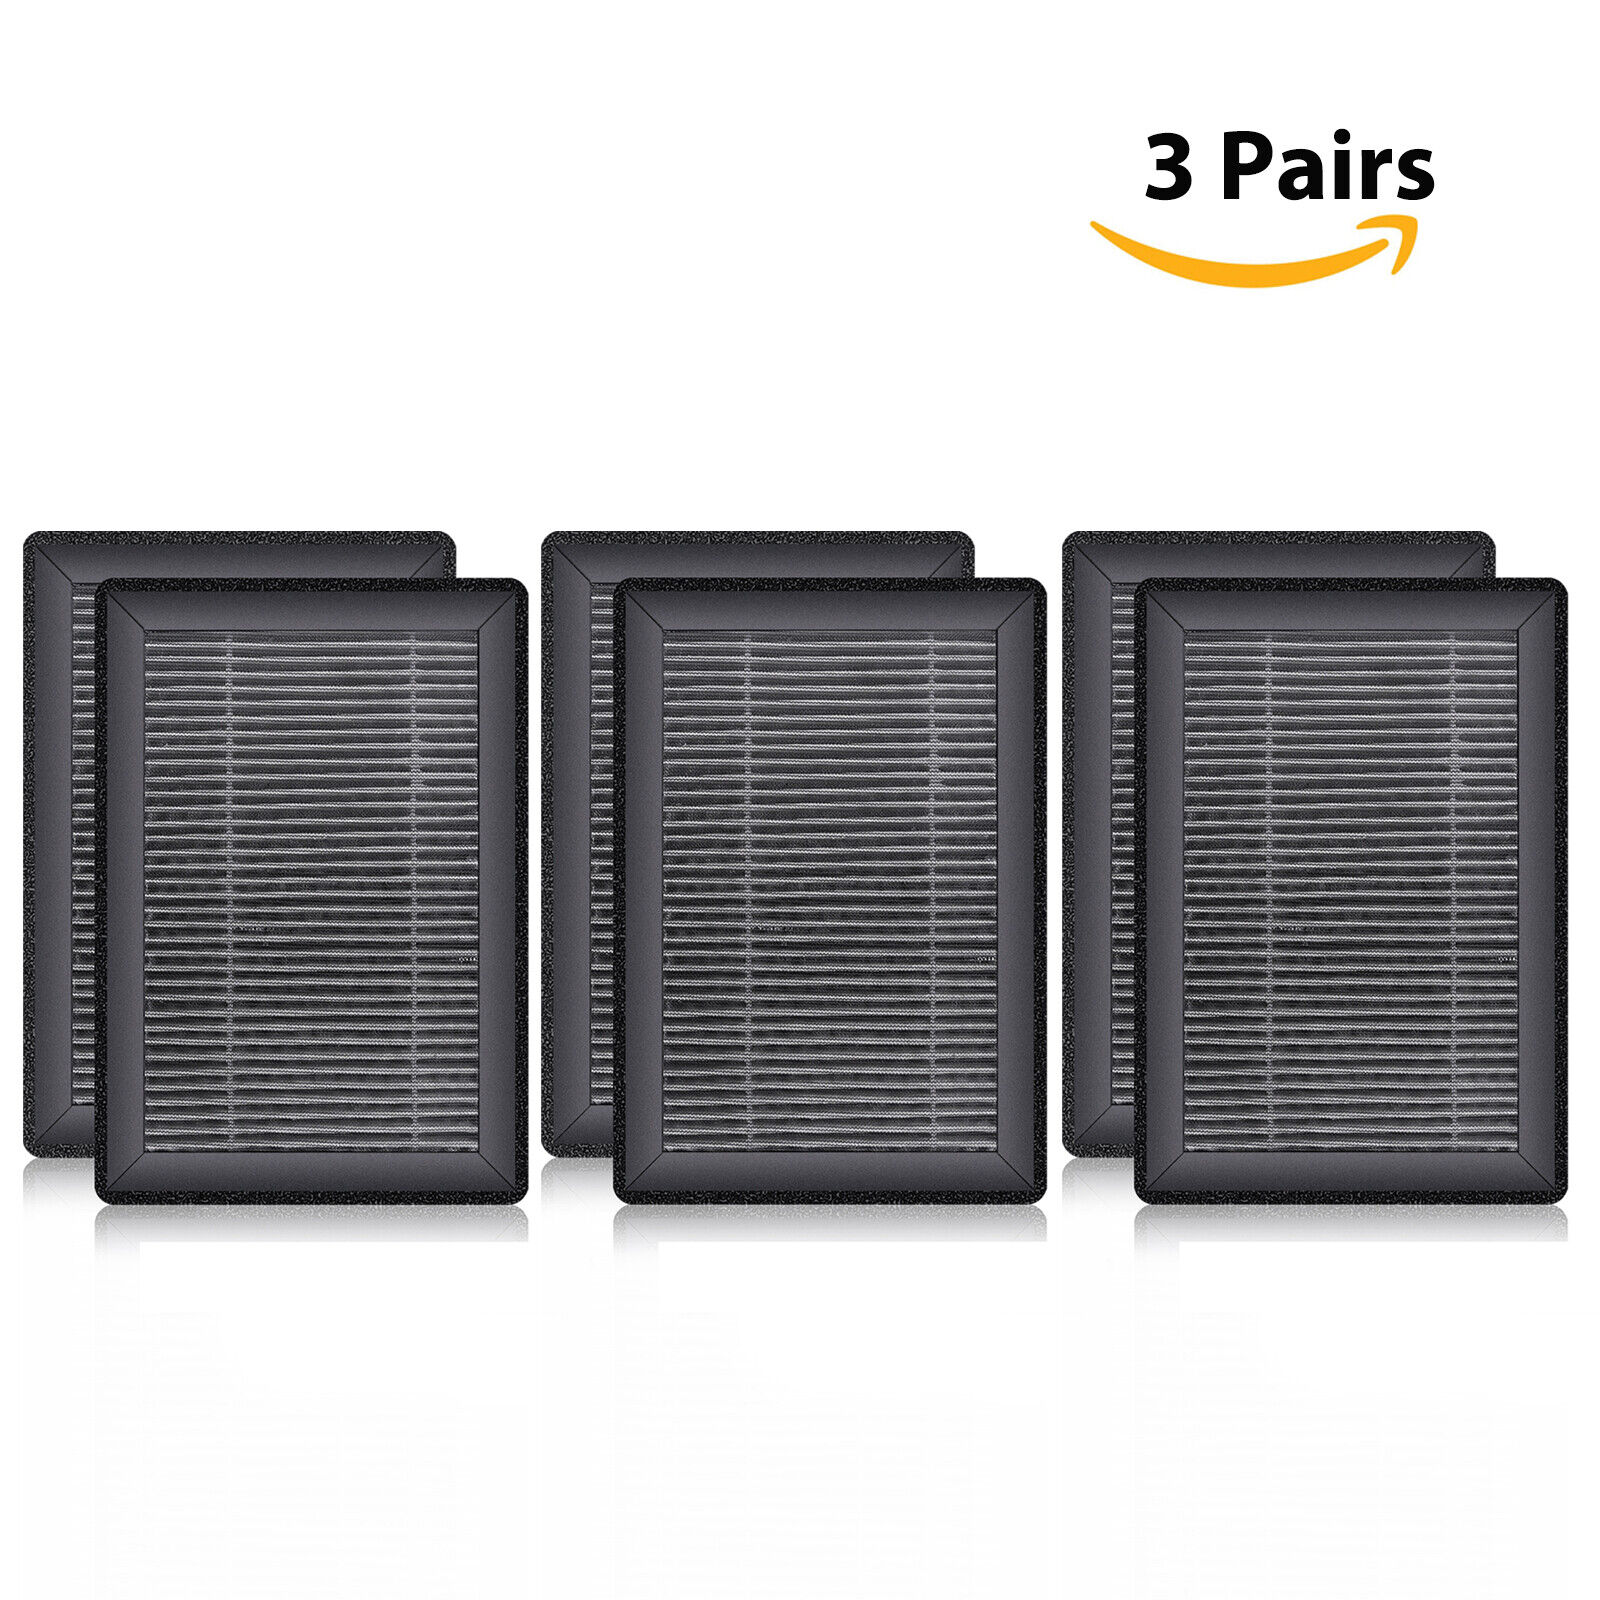 3 Pack Repacement Filters for JR6 / AP3J9 /2J8 Air Purifier 3-Stage Filtration